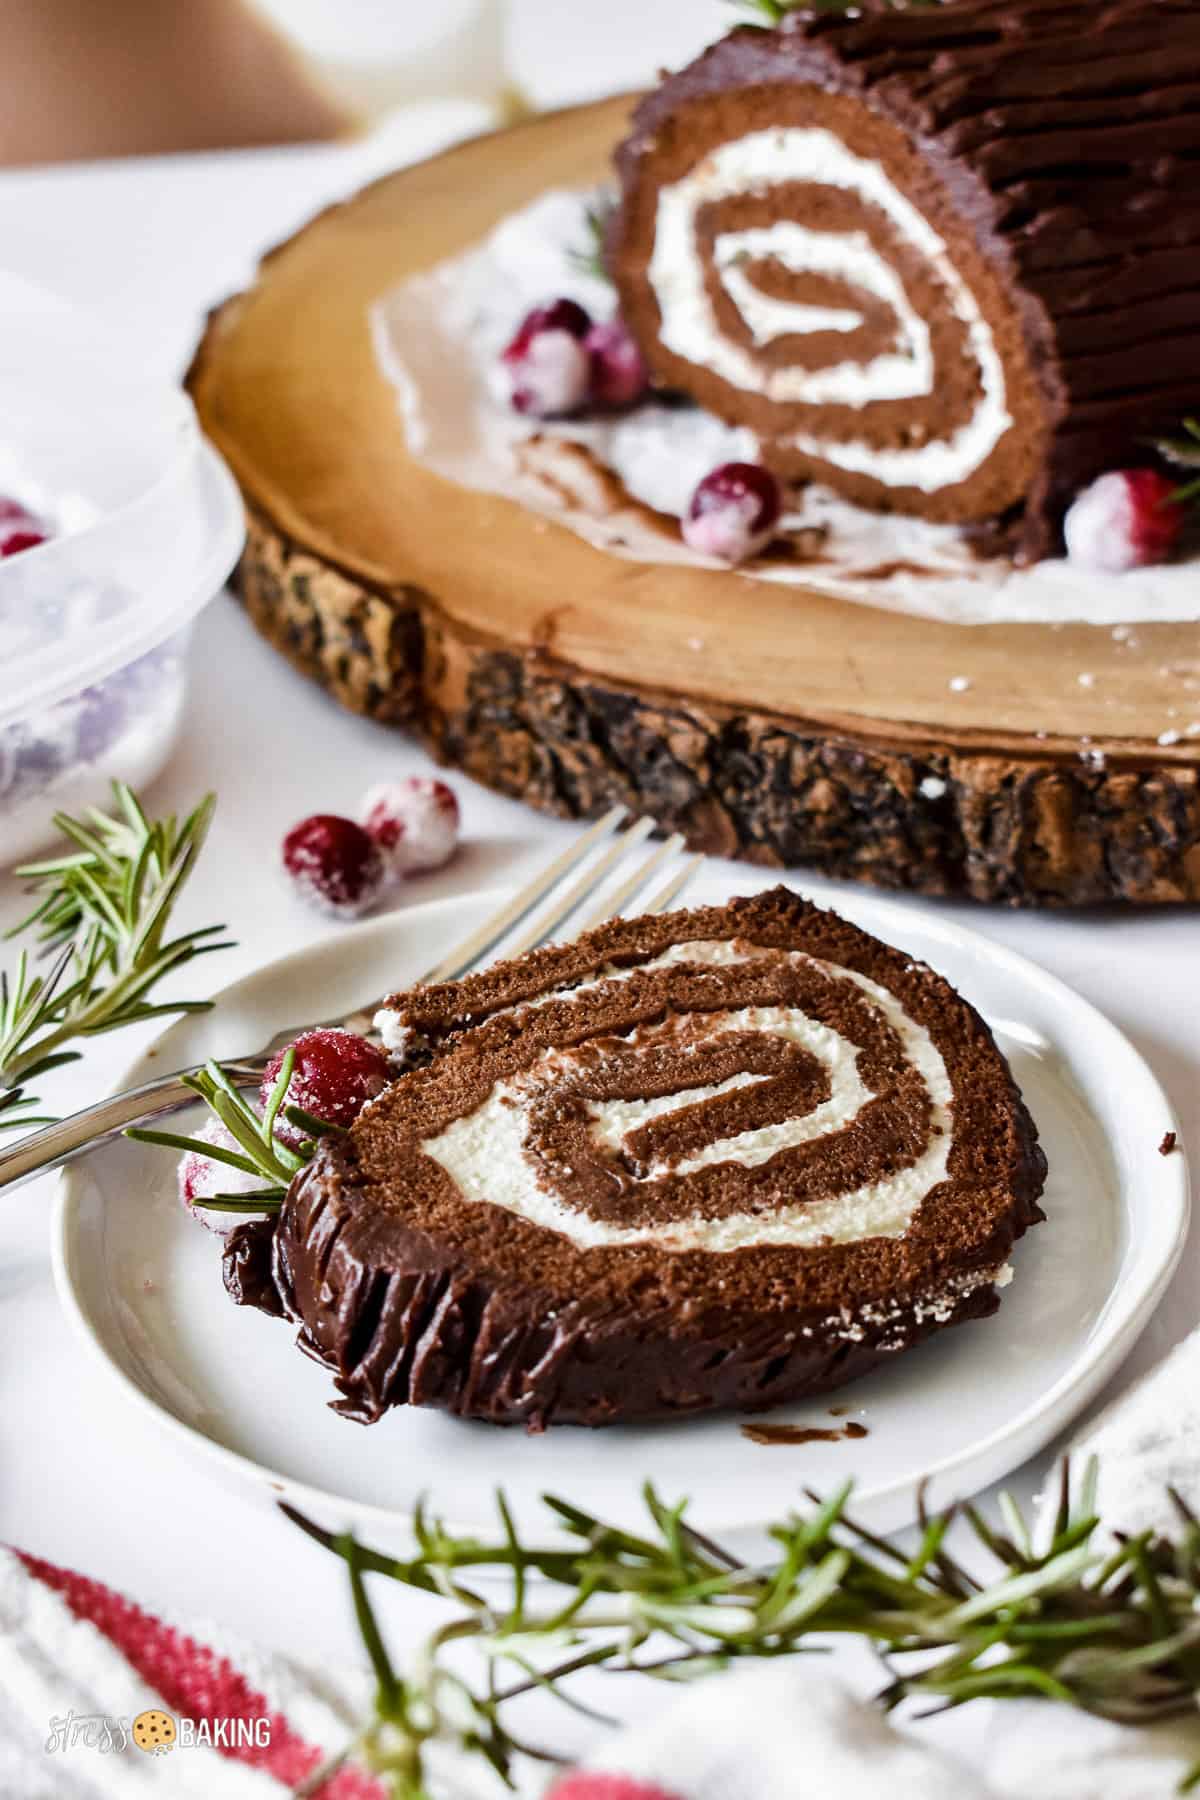 A slice of chocolate yule log cake filled with whipped cream and decorated with sugared cranberries and rosemary twigs